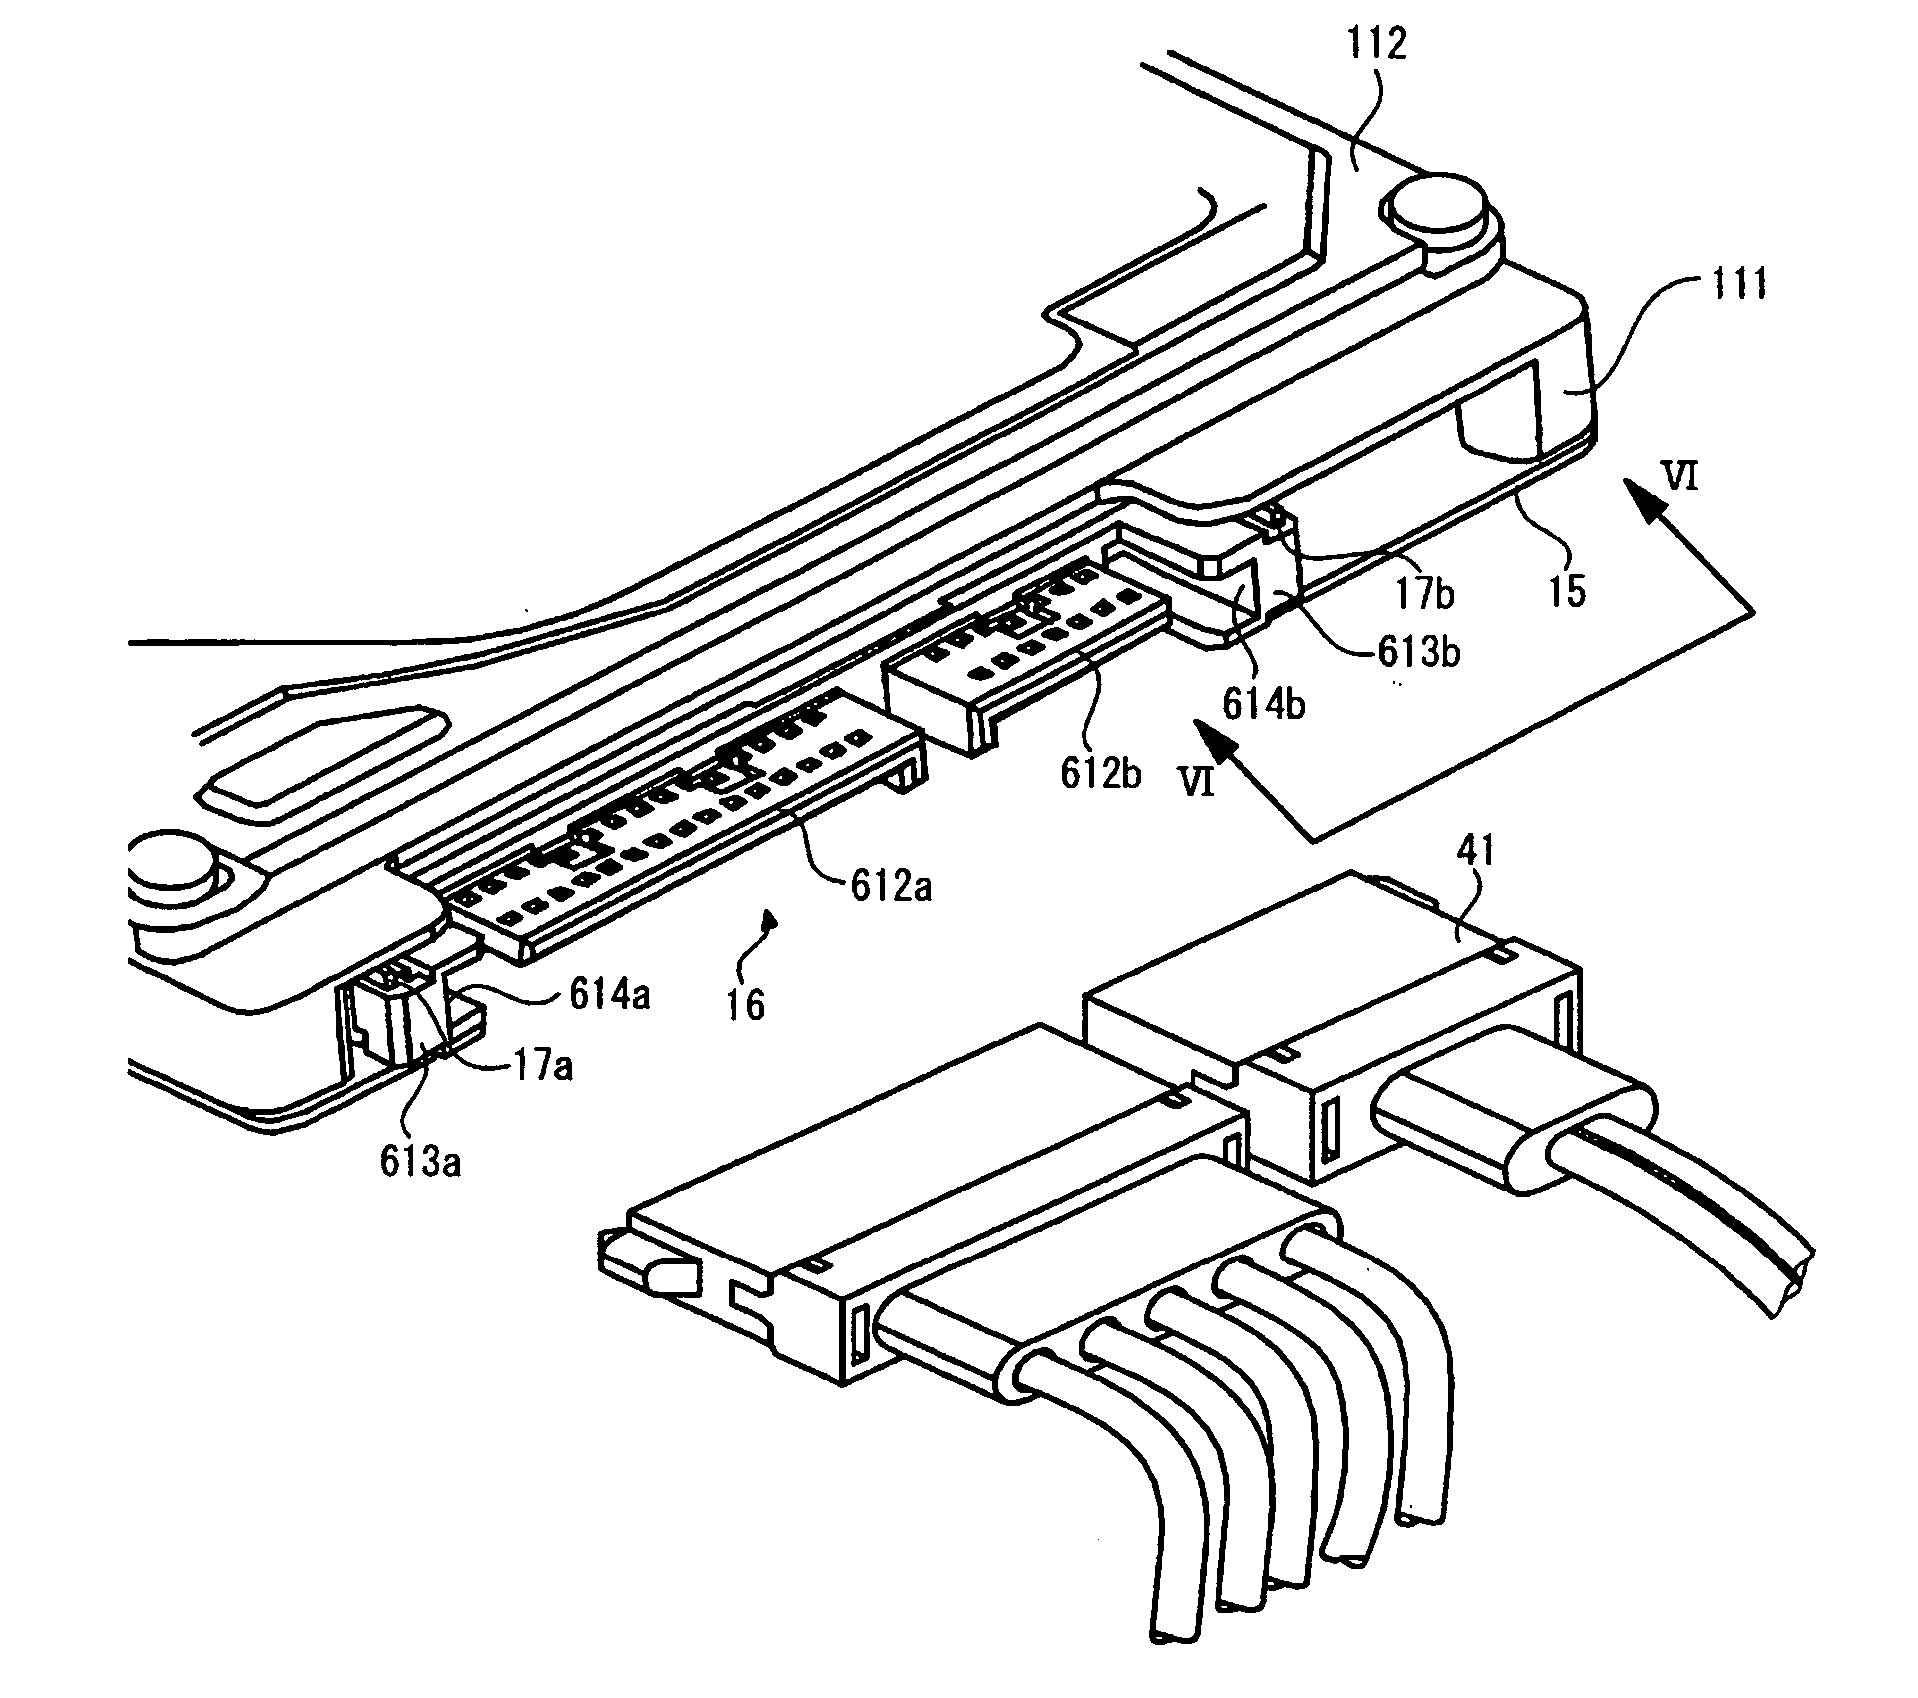 SATA connector protection mechanism